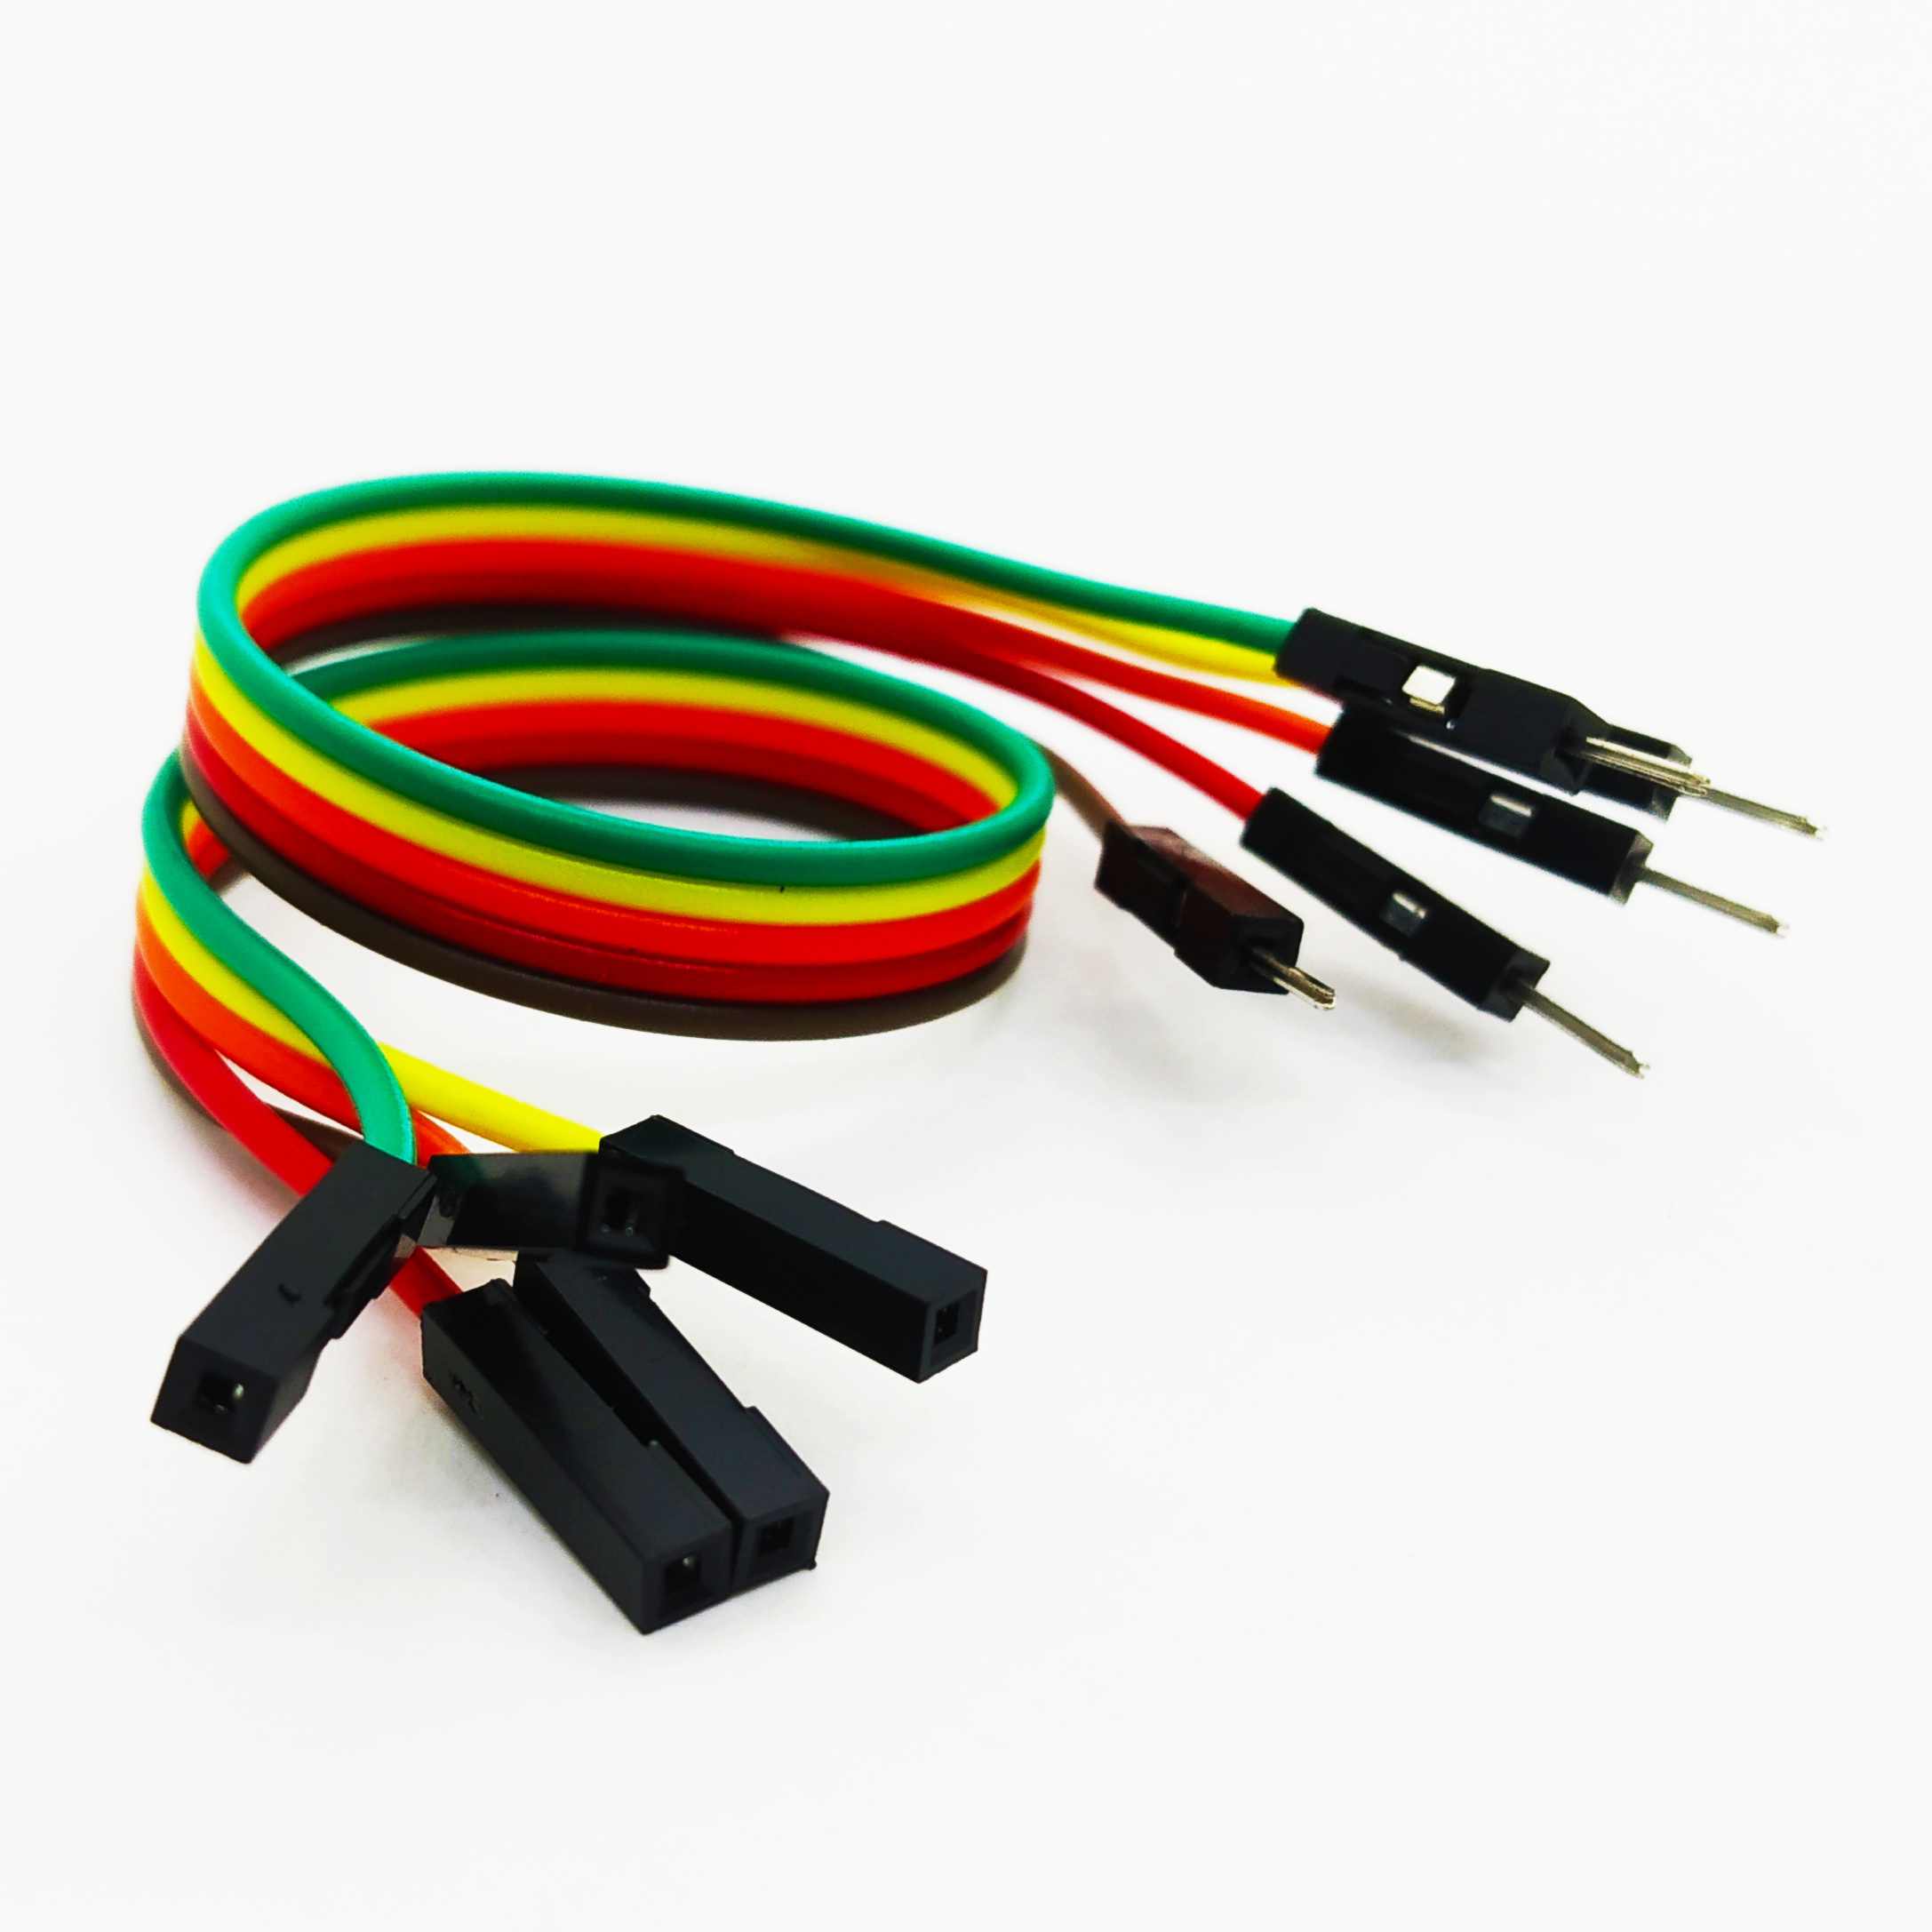 MALE TO FEMALE JUMPER WIRES 5 PCS - 20CM